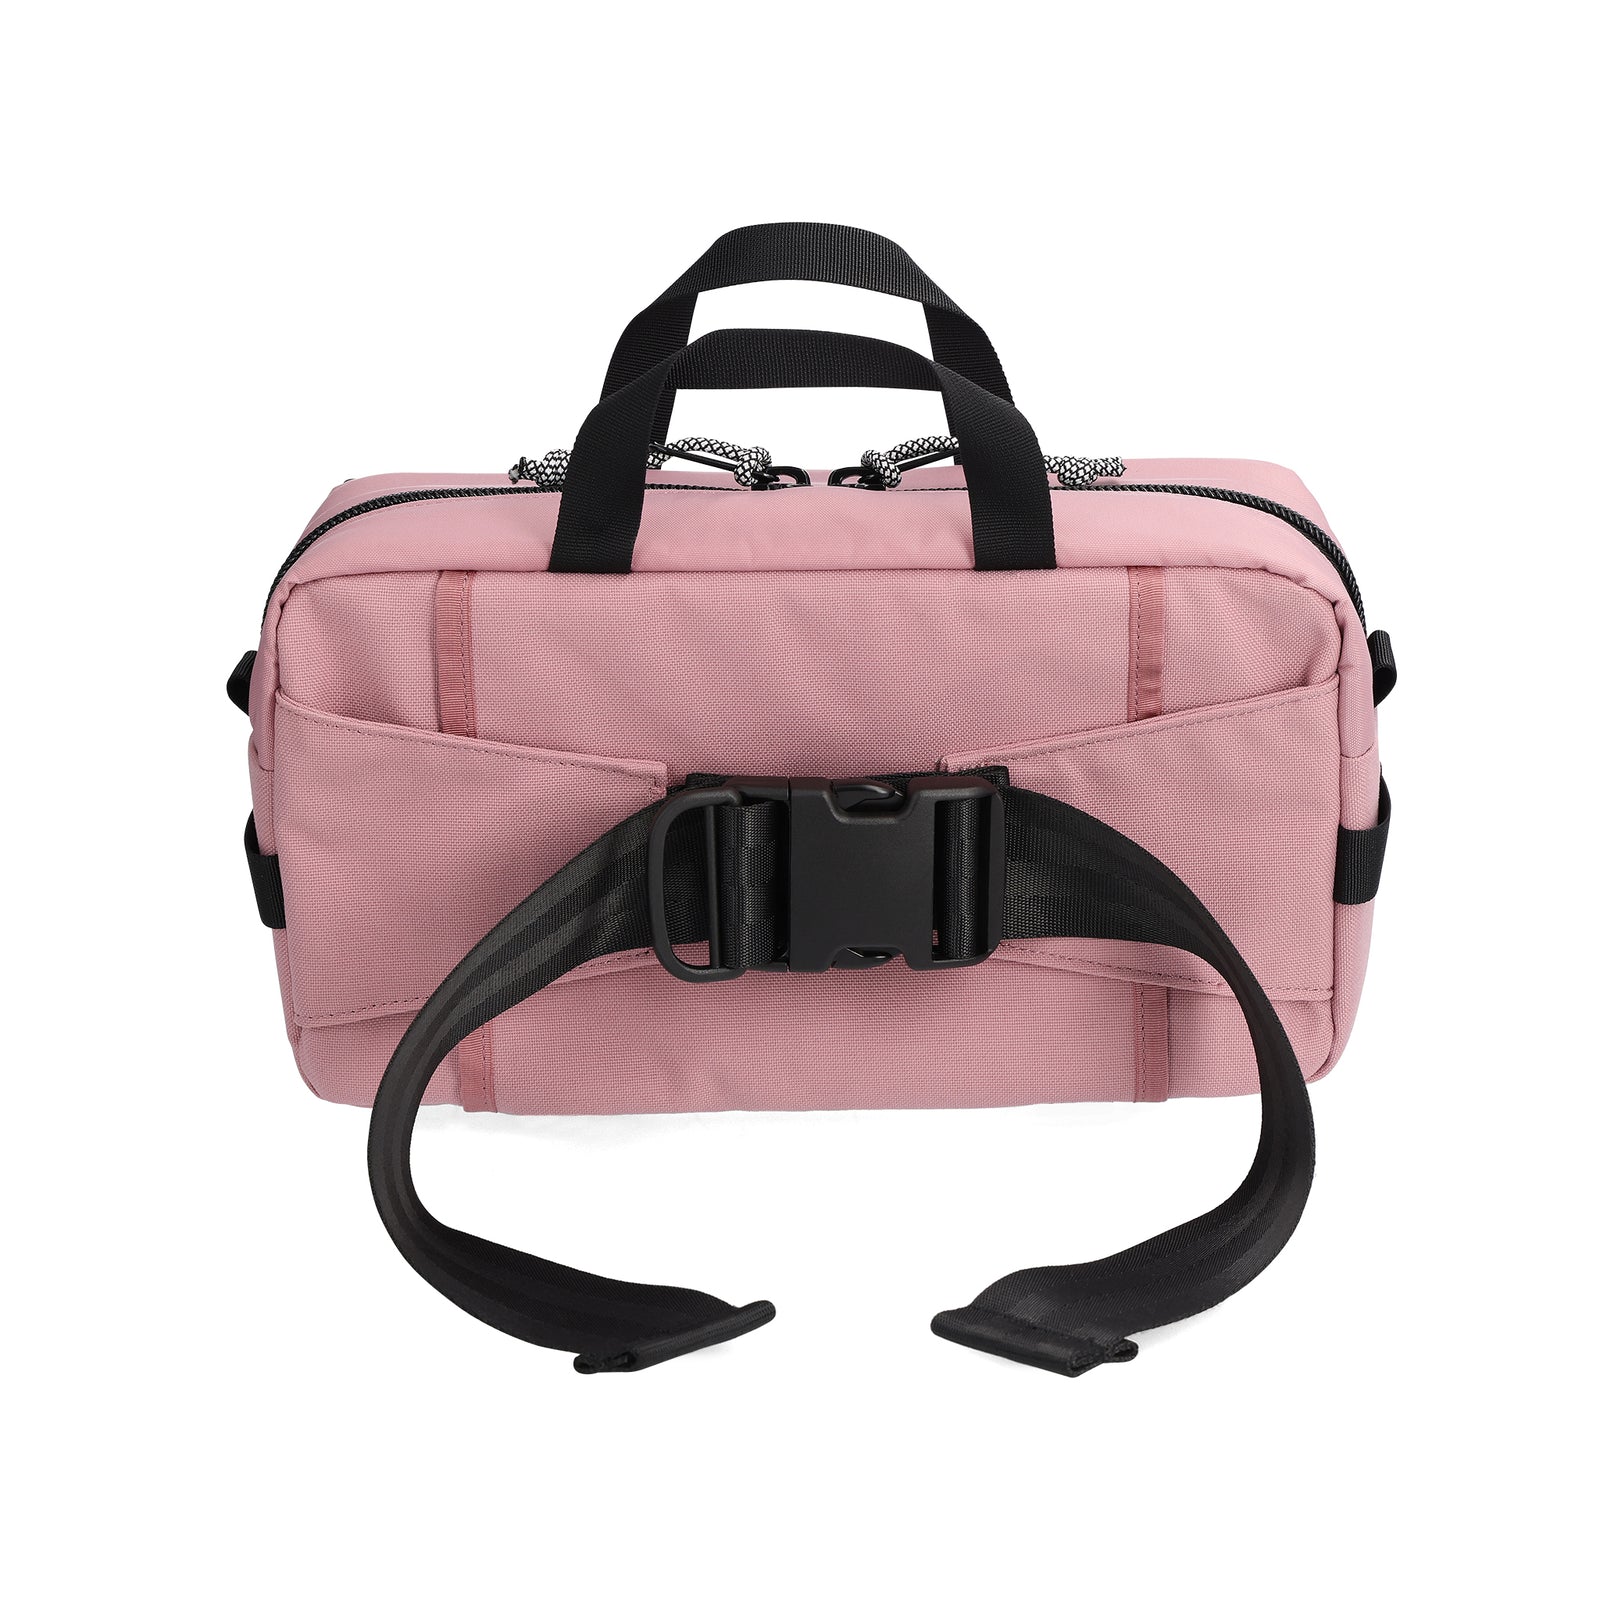 Back View of Topo Designs Quick Pack  in "Rose"